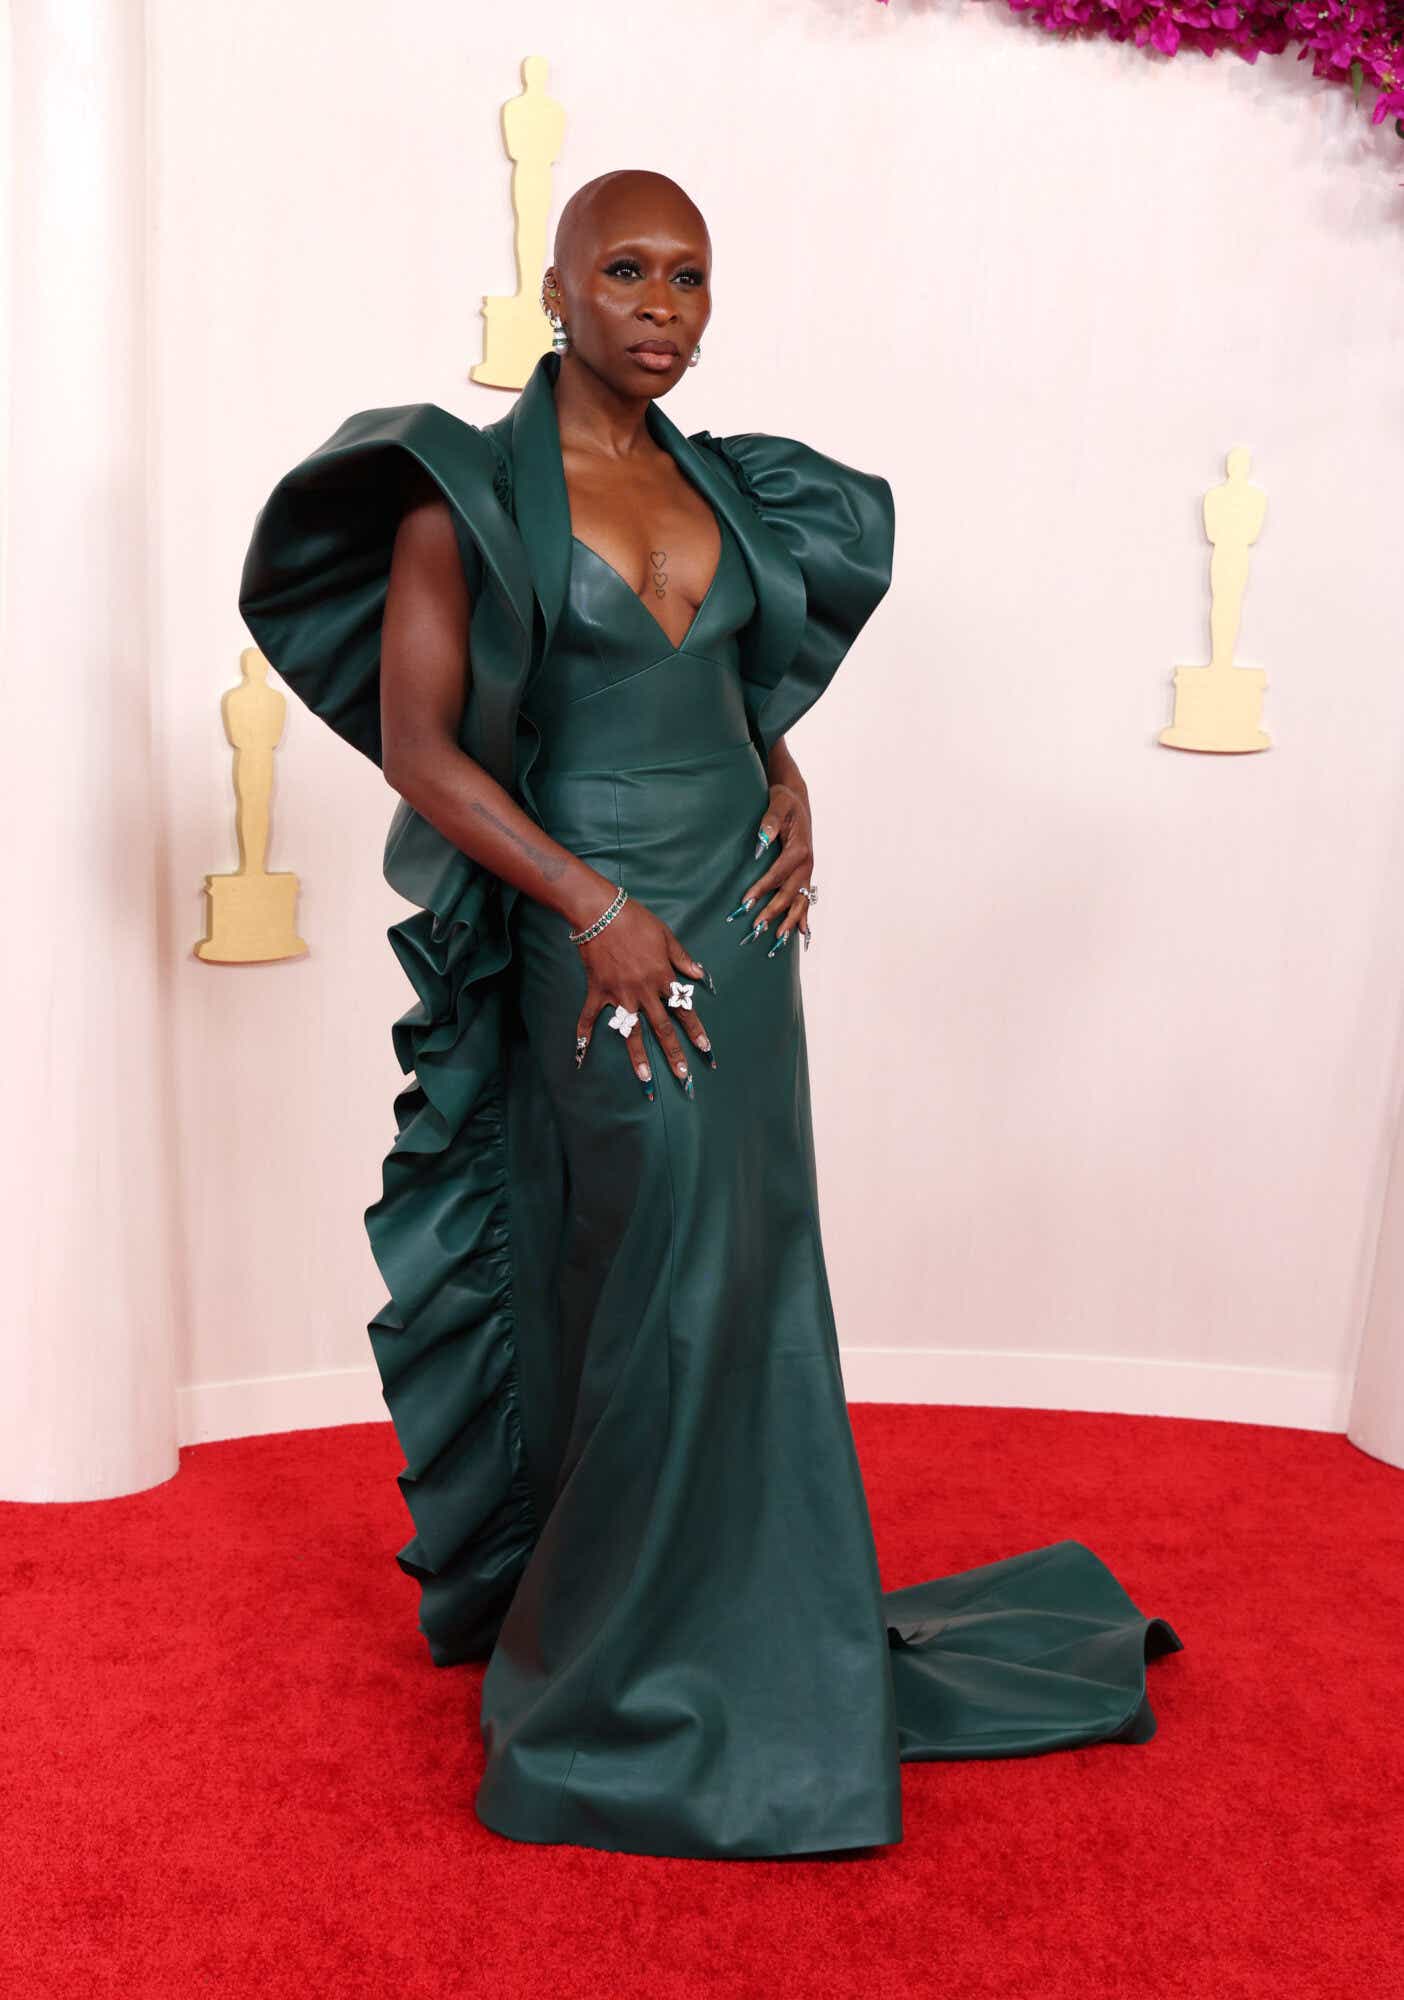 Cynthia Erivo arrives at the Oscars wearing a teal gown with dramatic shoulders and a ruffle down the side. Her long nails match her gown.